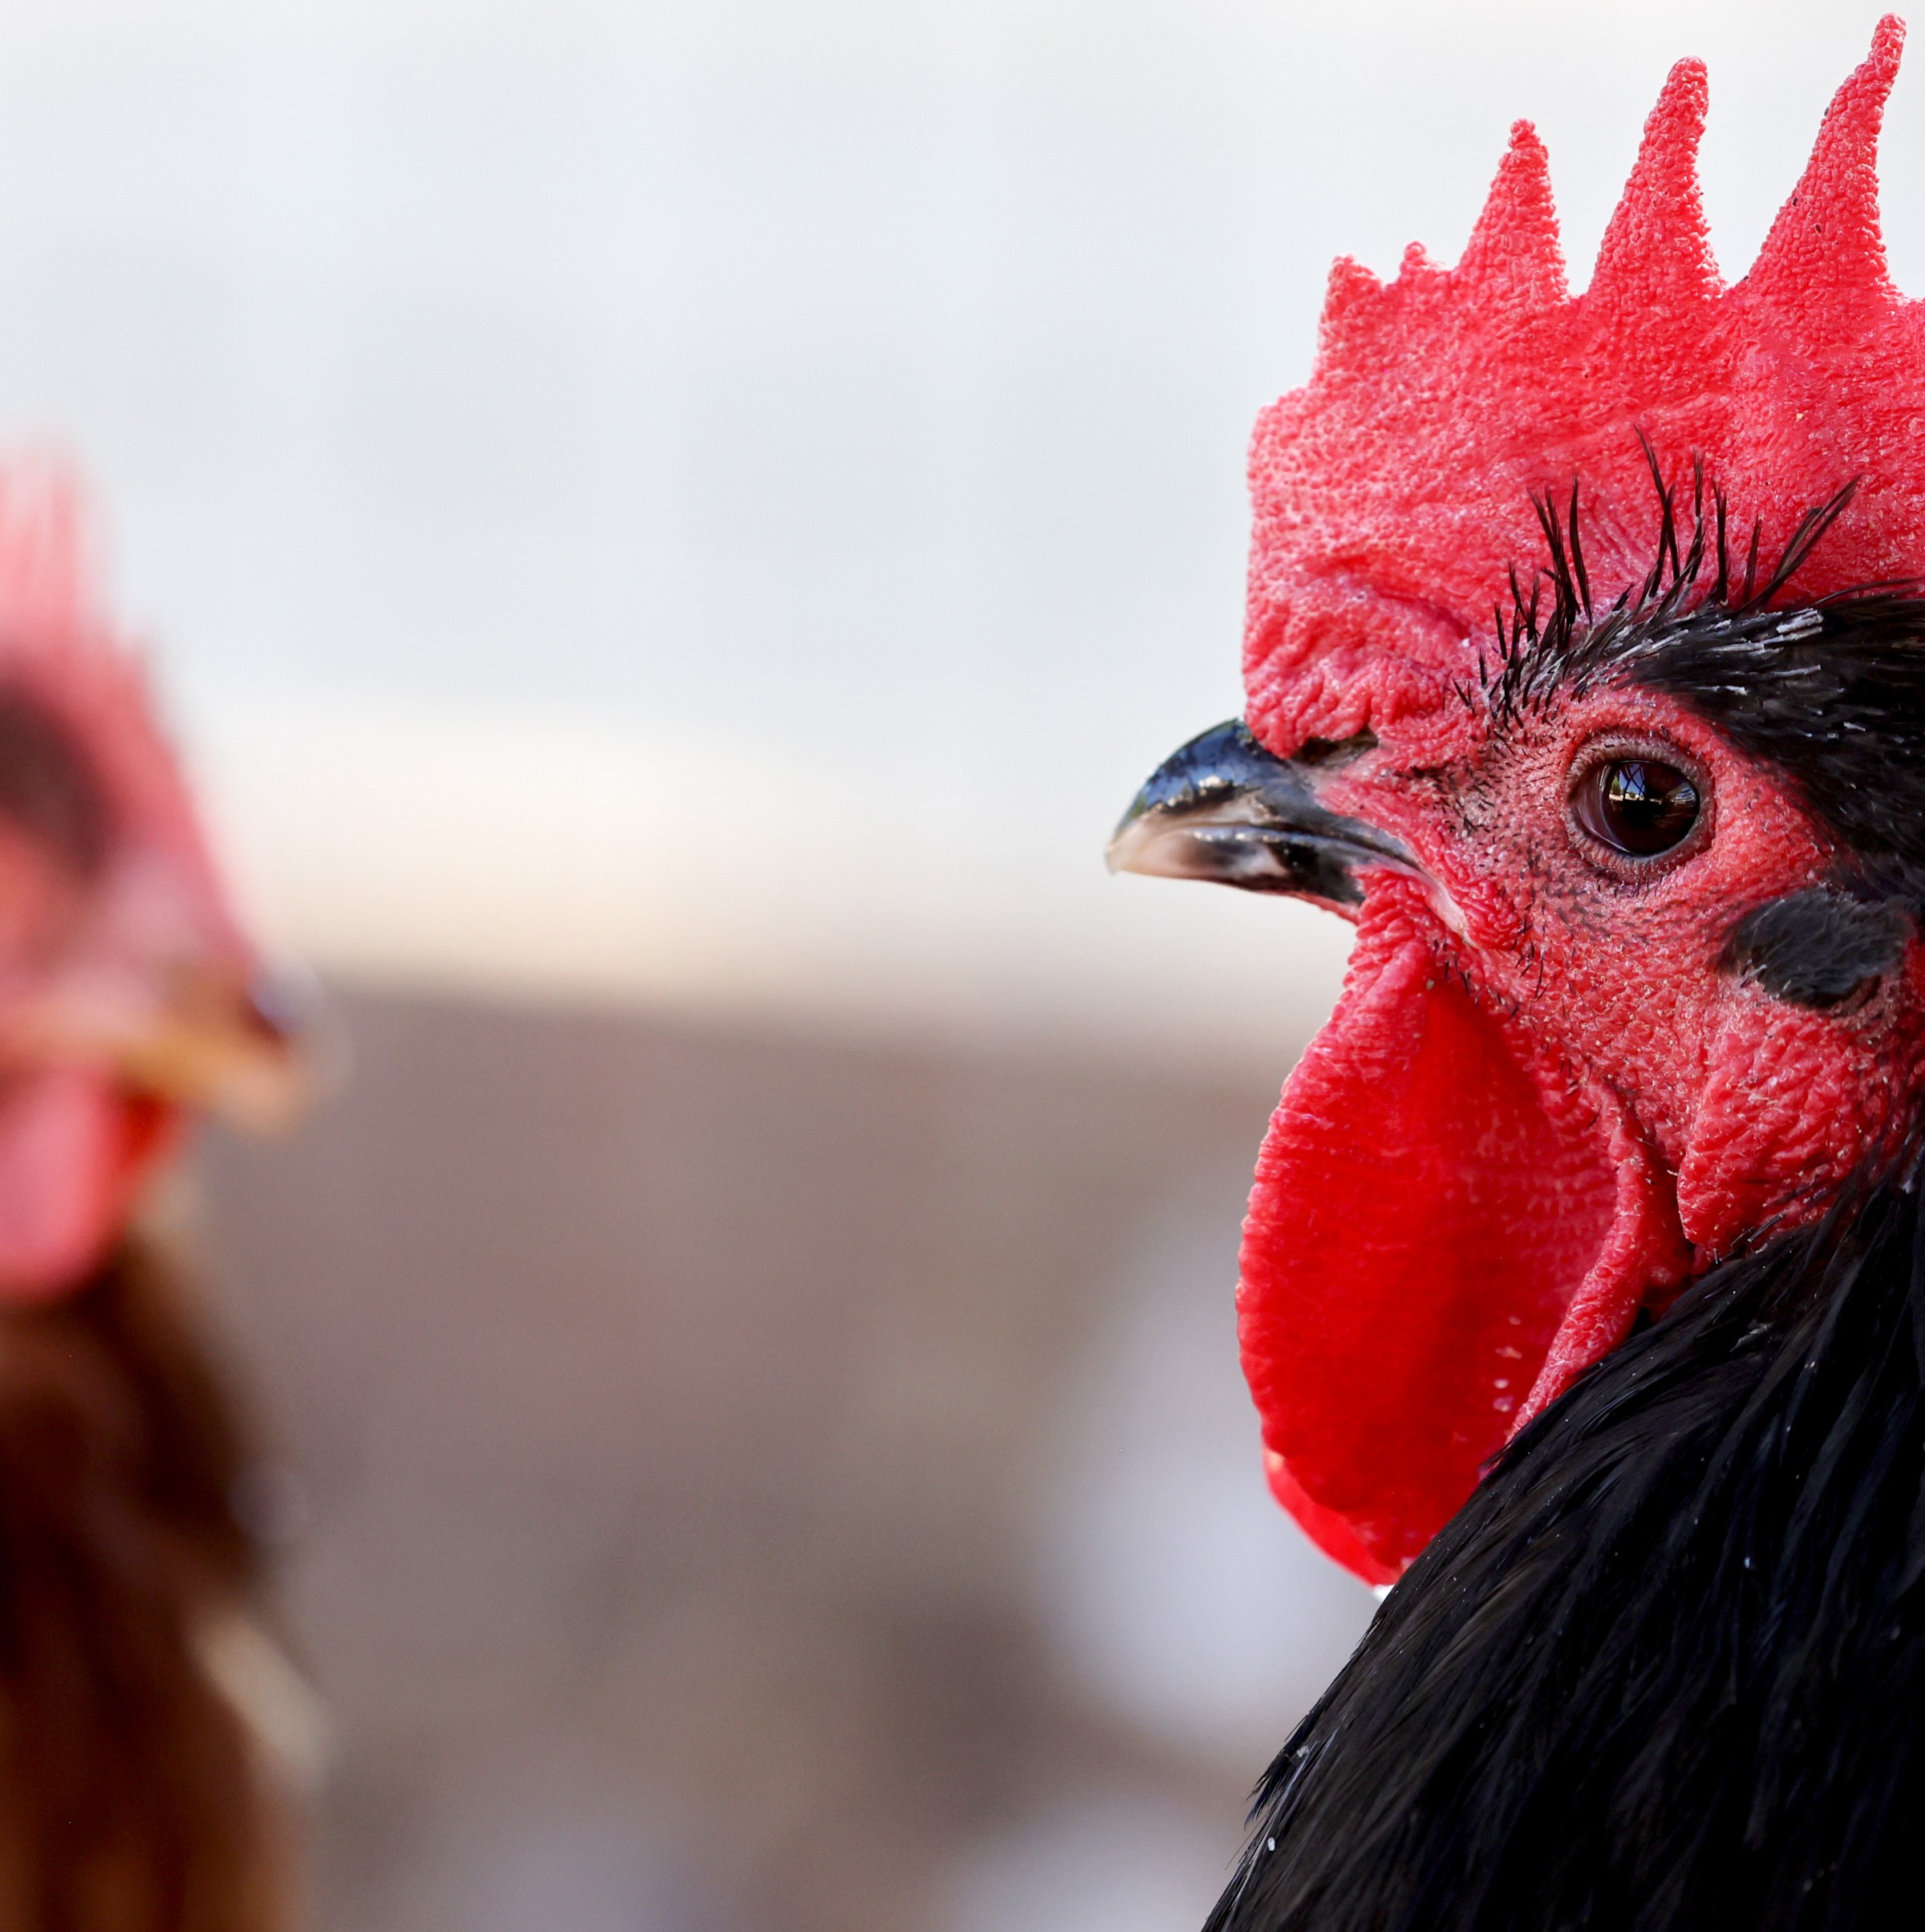 No one wants to think about pandemics. But bird flu doesn’t care.